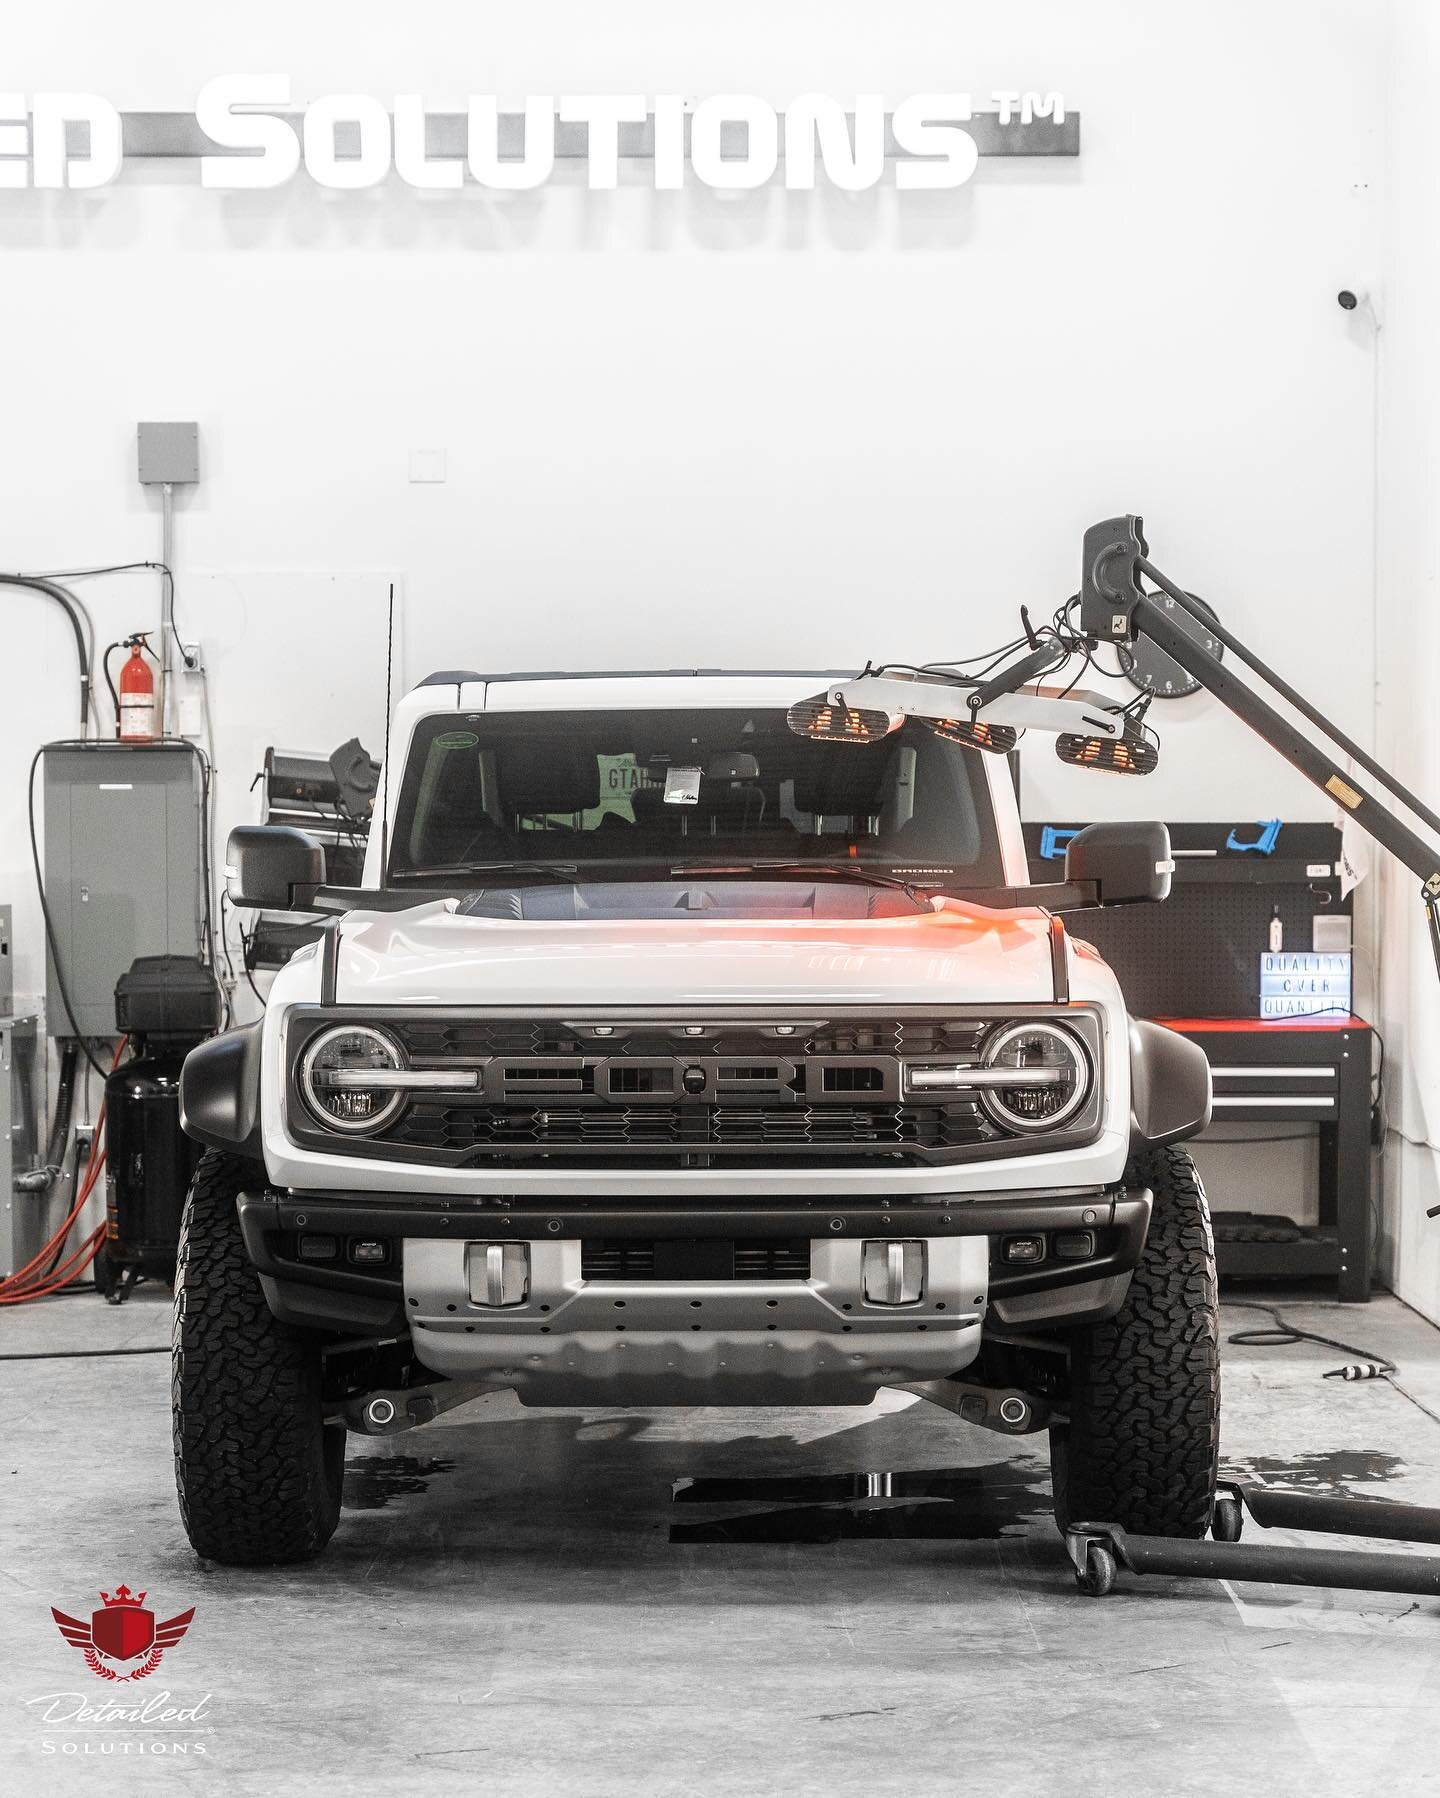 ❕BRONCO #Raptor WRAPPED in Film Solutions&trade; Paint Protection. 
➖
☑️ Self-healing
☑️ #Durable Paint Protection
☑️ Flexible &amp; Stretchable
☑️ Hydrophobic Top Coat
☑️ High Gloss &amp; Satin Finishes
☑️ #Lifetime Warranty 
➖
If you&rsquo;re plann